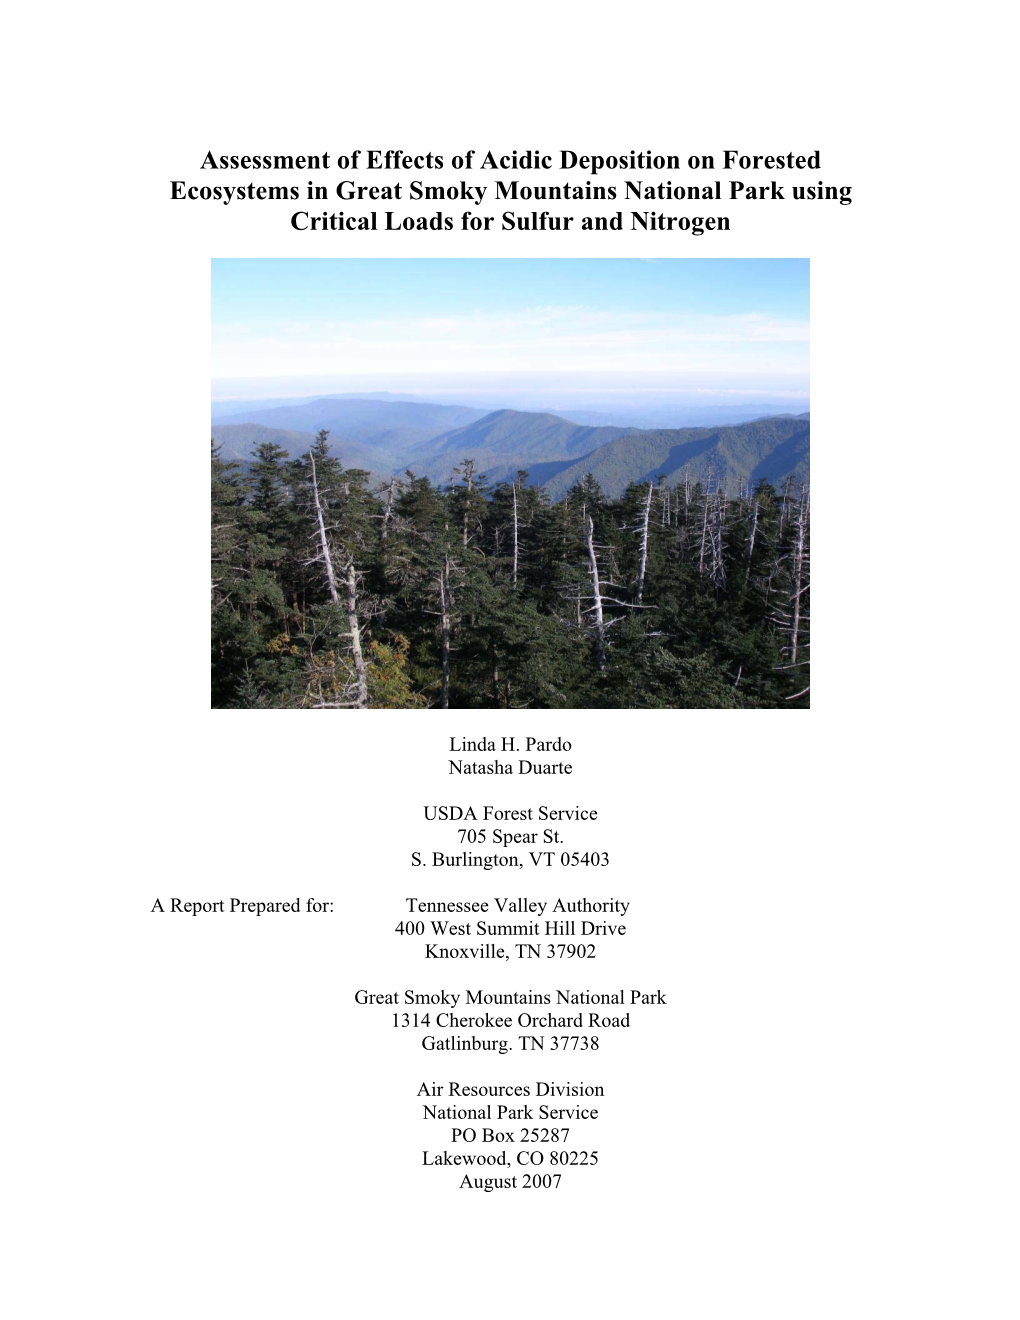 Assessment of Effects of Acidic Deposition on Forested Ecosystems in Great Smoky Mountains National Park Using Critical Loads for Sulfur and Nitrogen